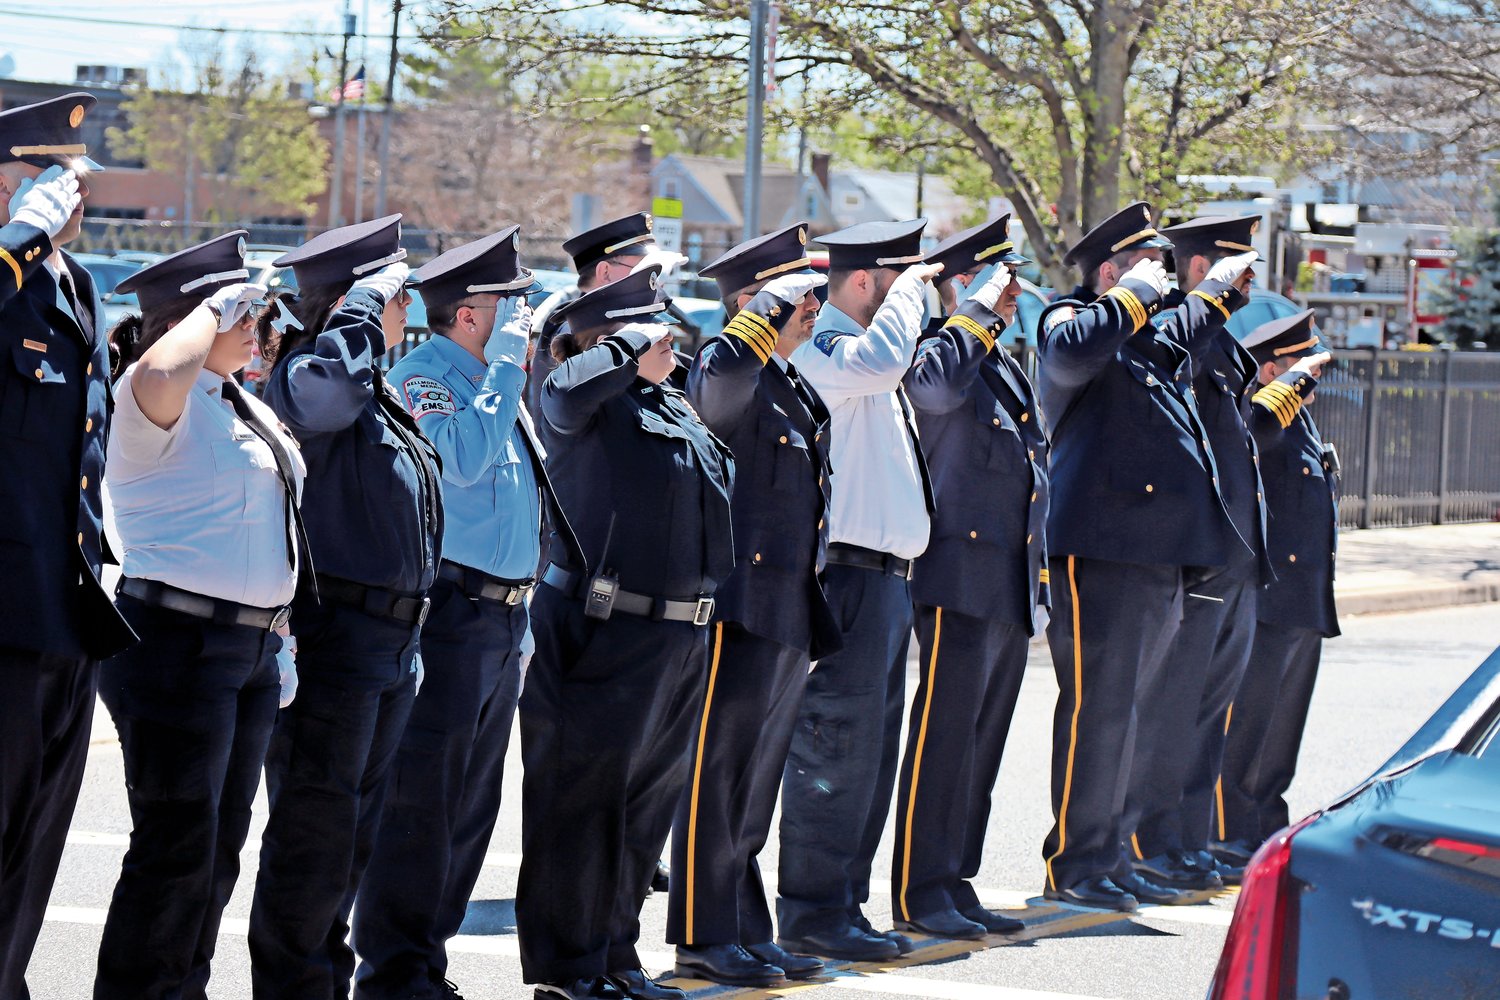 The Bellmore-Merrick Emergency Medical Services squad honored Thomas DeFrancisci at his funeral in Bellmore.